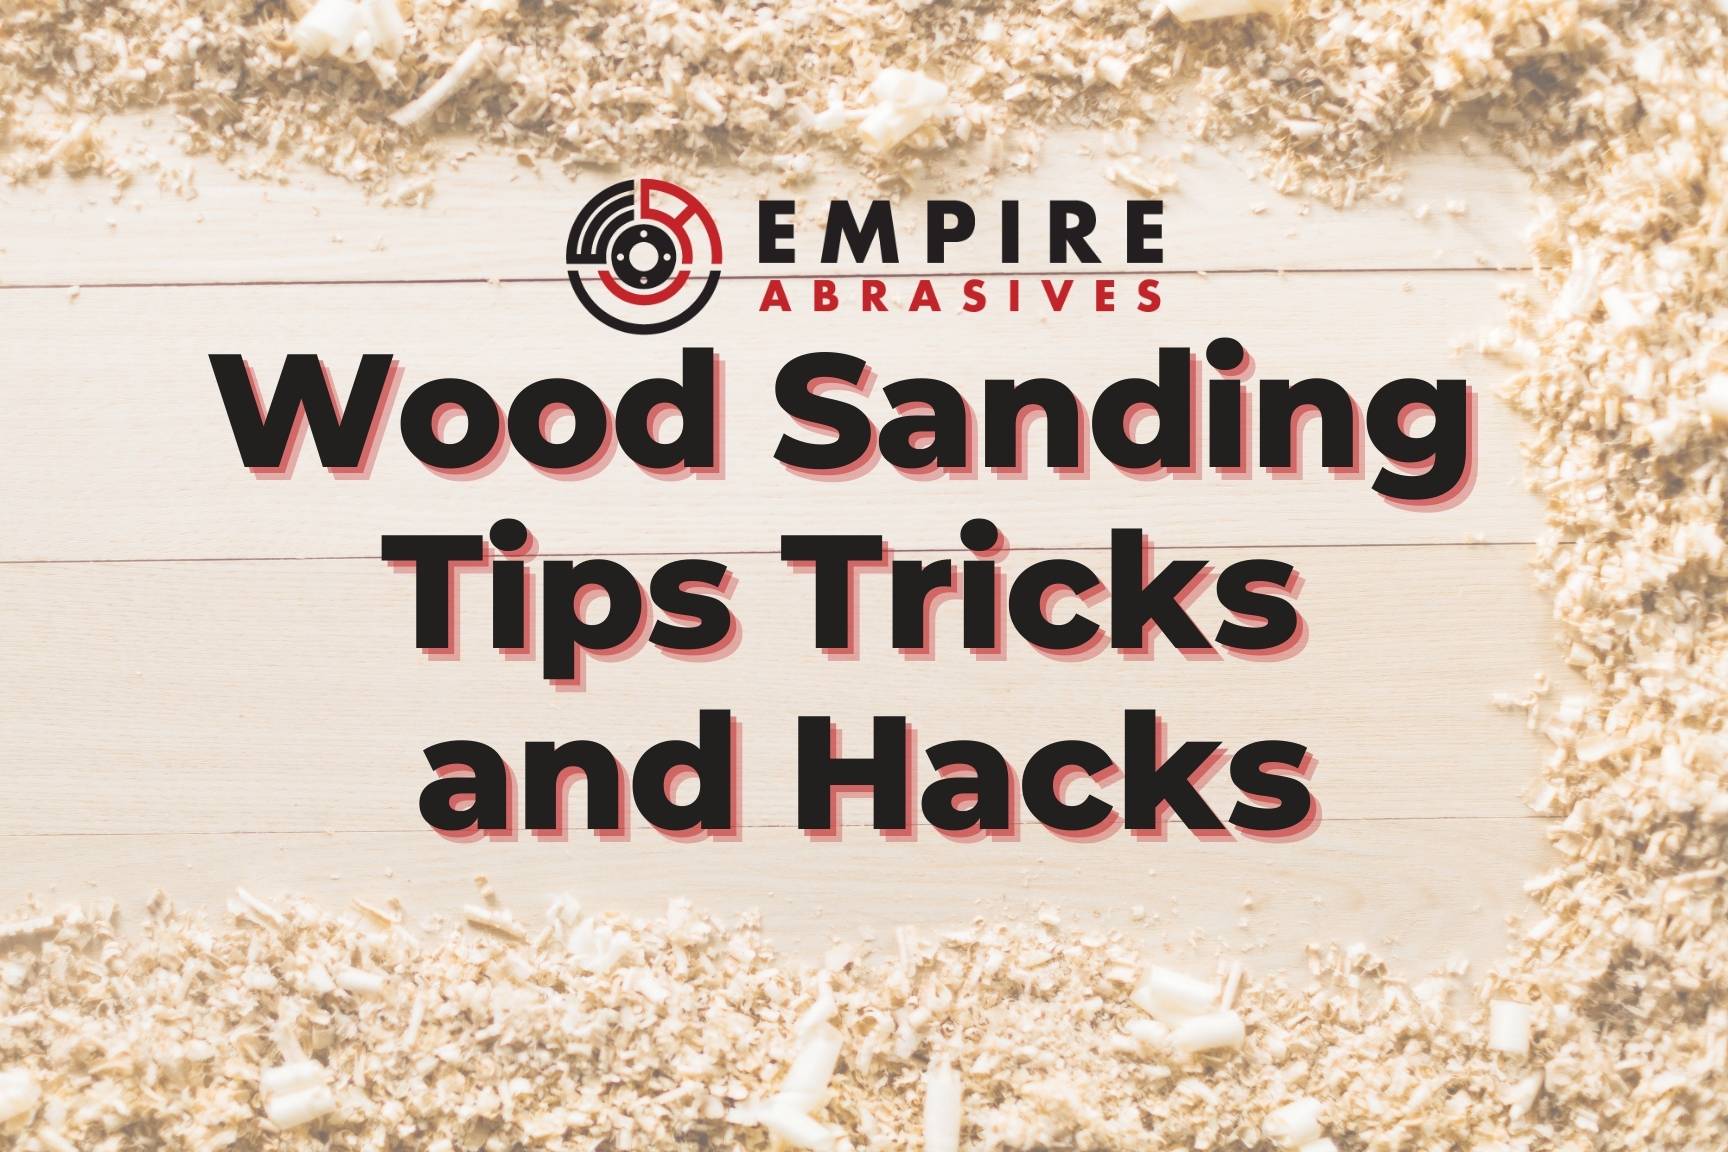 Wood Sanding Tips Tricks and Hacks to Save Time and Money - sawdust in background